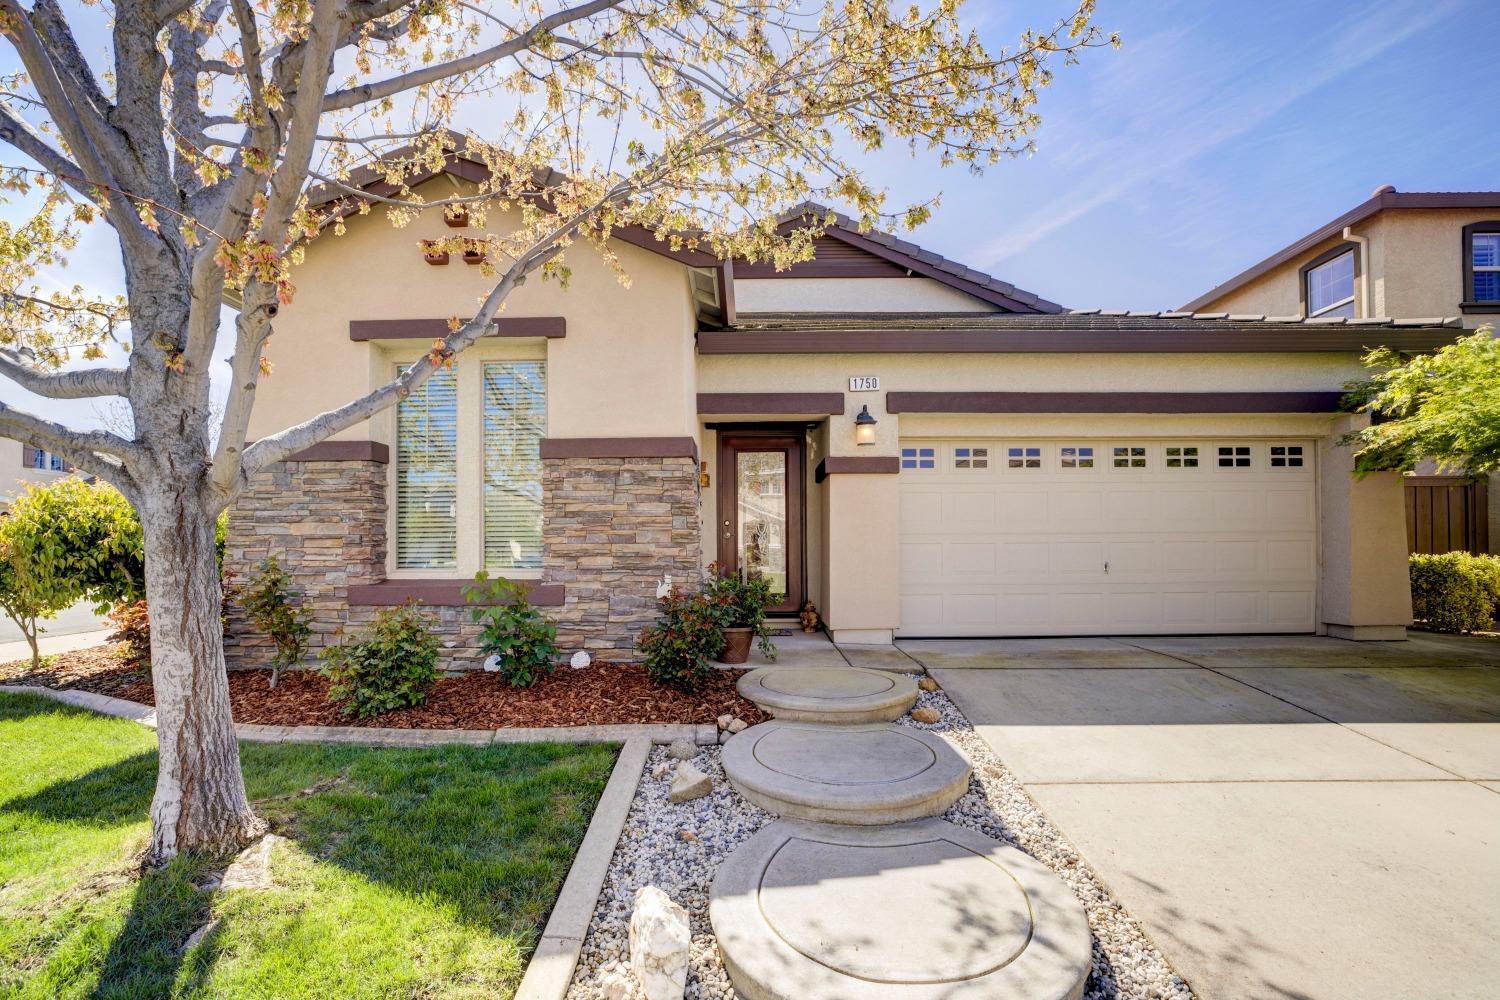 Photo of 1750 Ravenna Wy in Roseville, CA